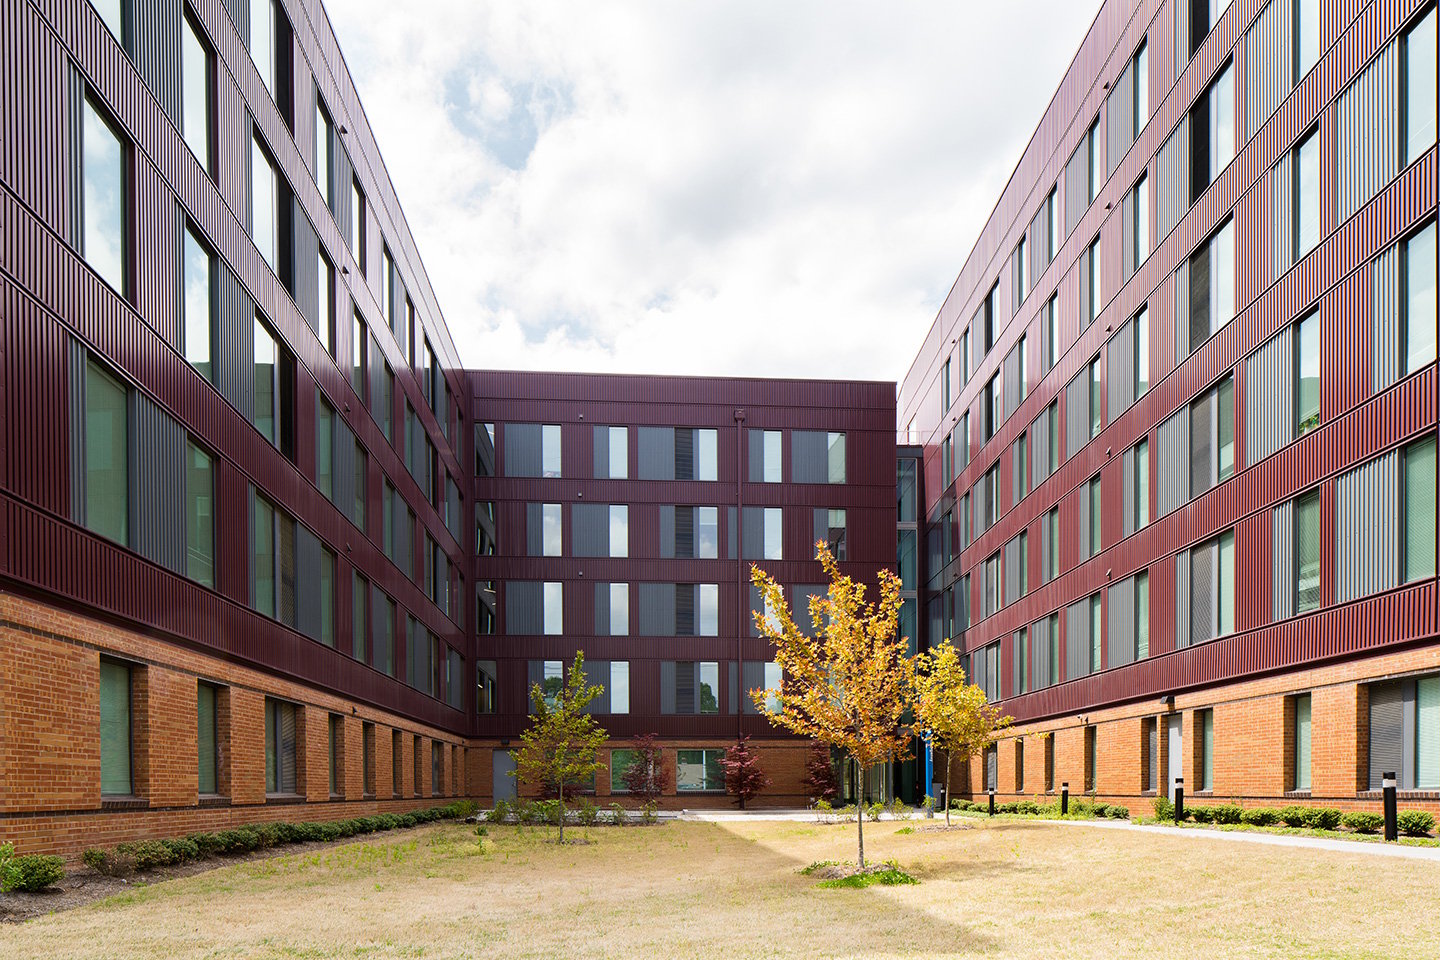 The new housing offers a courtyard for students to relax and enjoy the outdoor space.